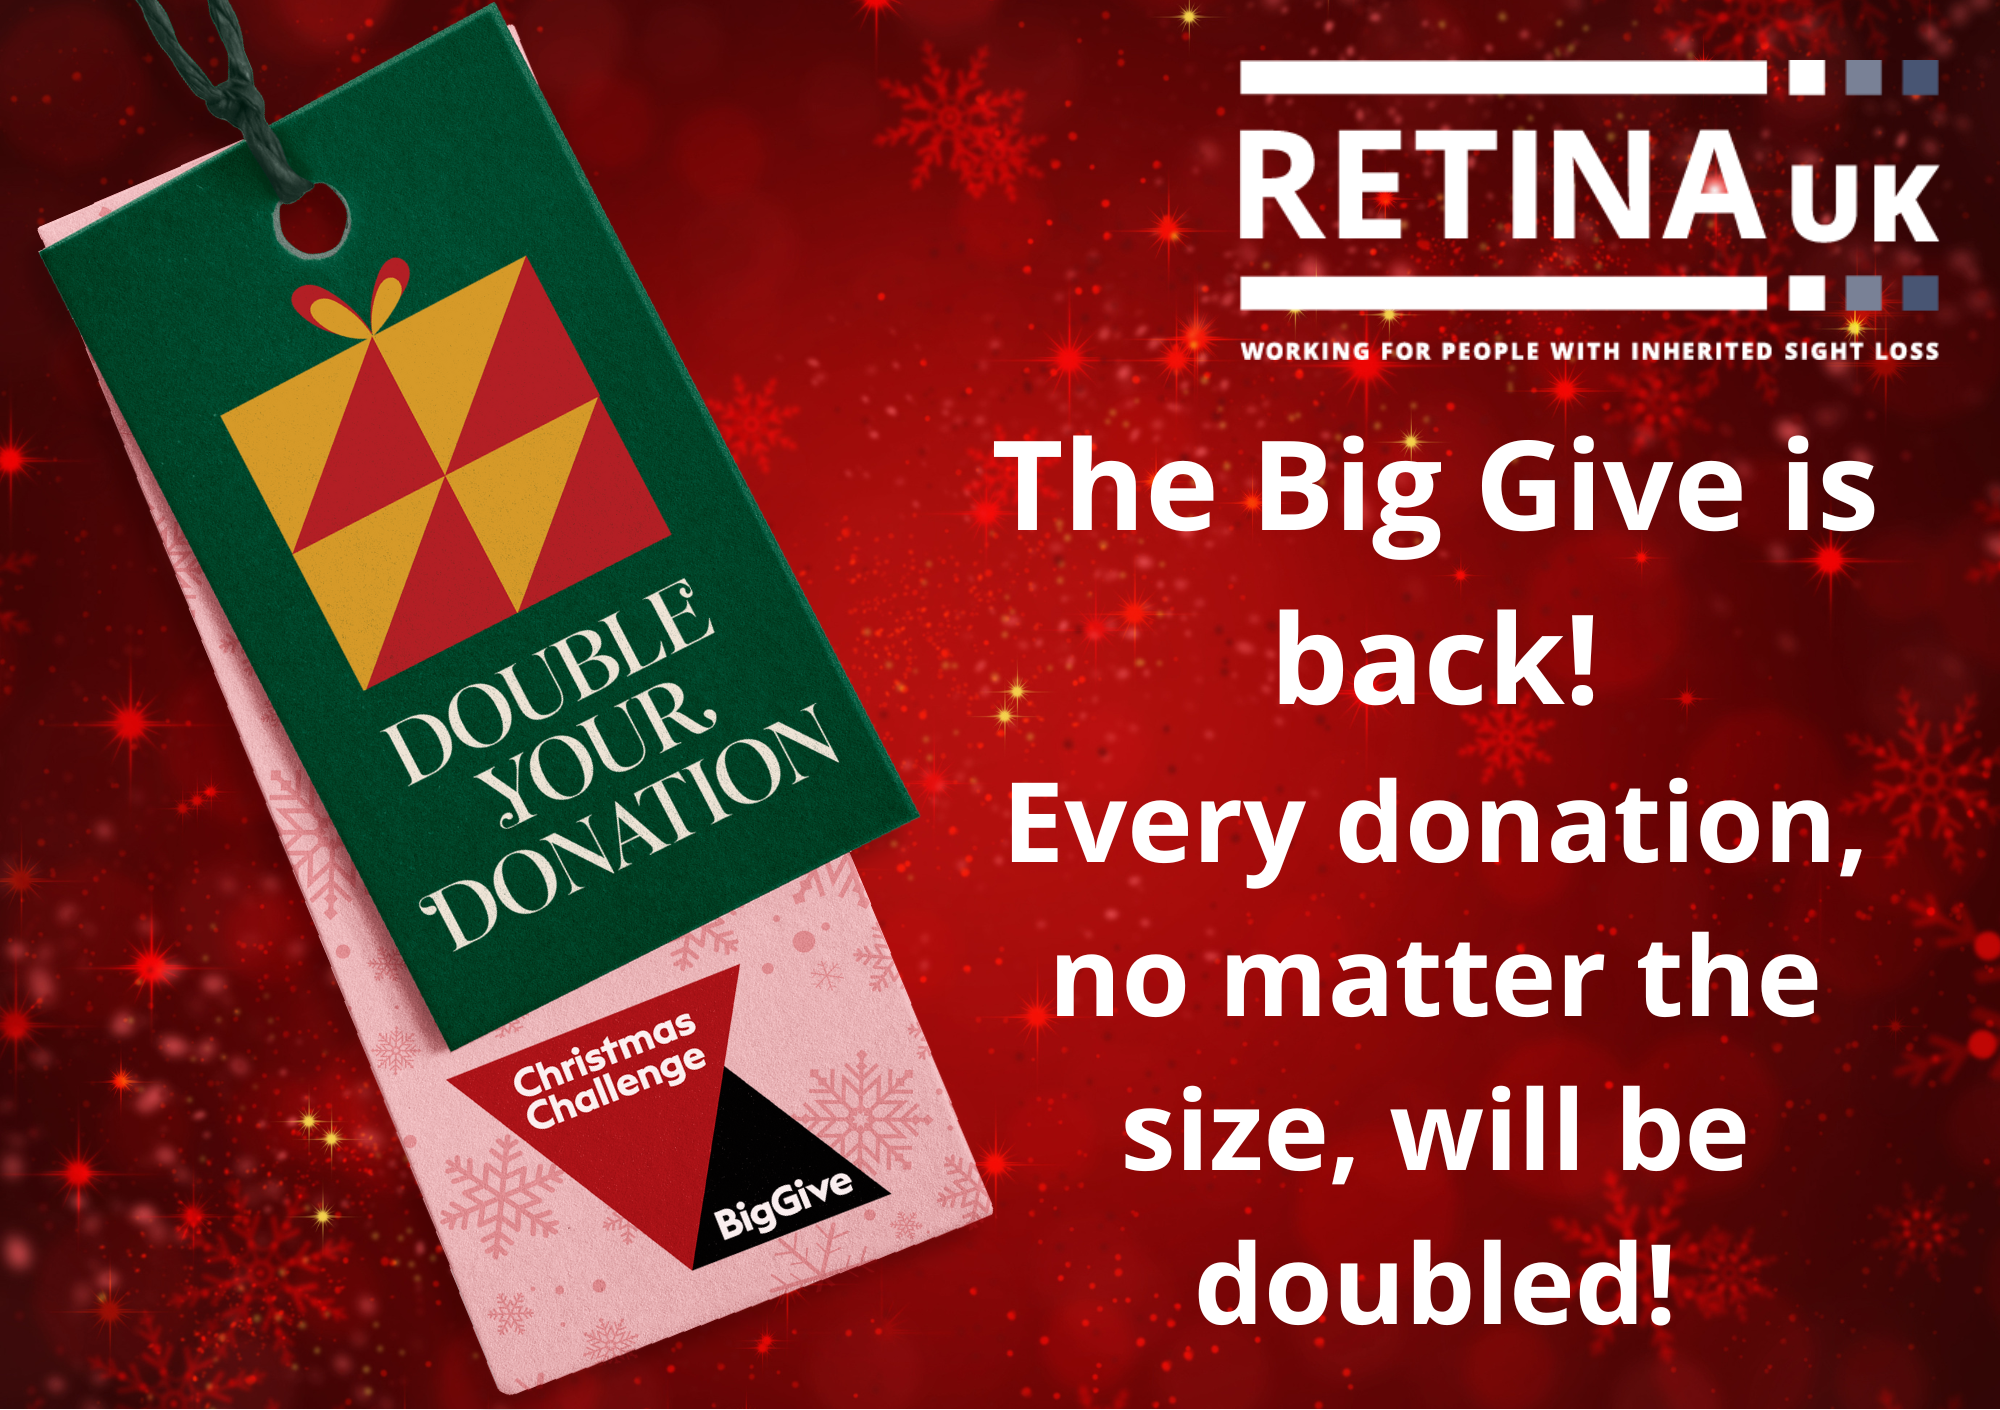 A red sparkly background with the words 'The Big Give is back. Every donation, no matter the size, will be doubled!' To the left of the wording is a green gift tag with the words 'Double your donation' on it